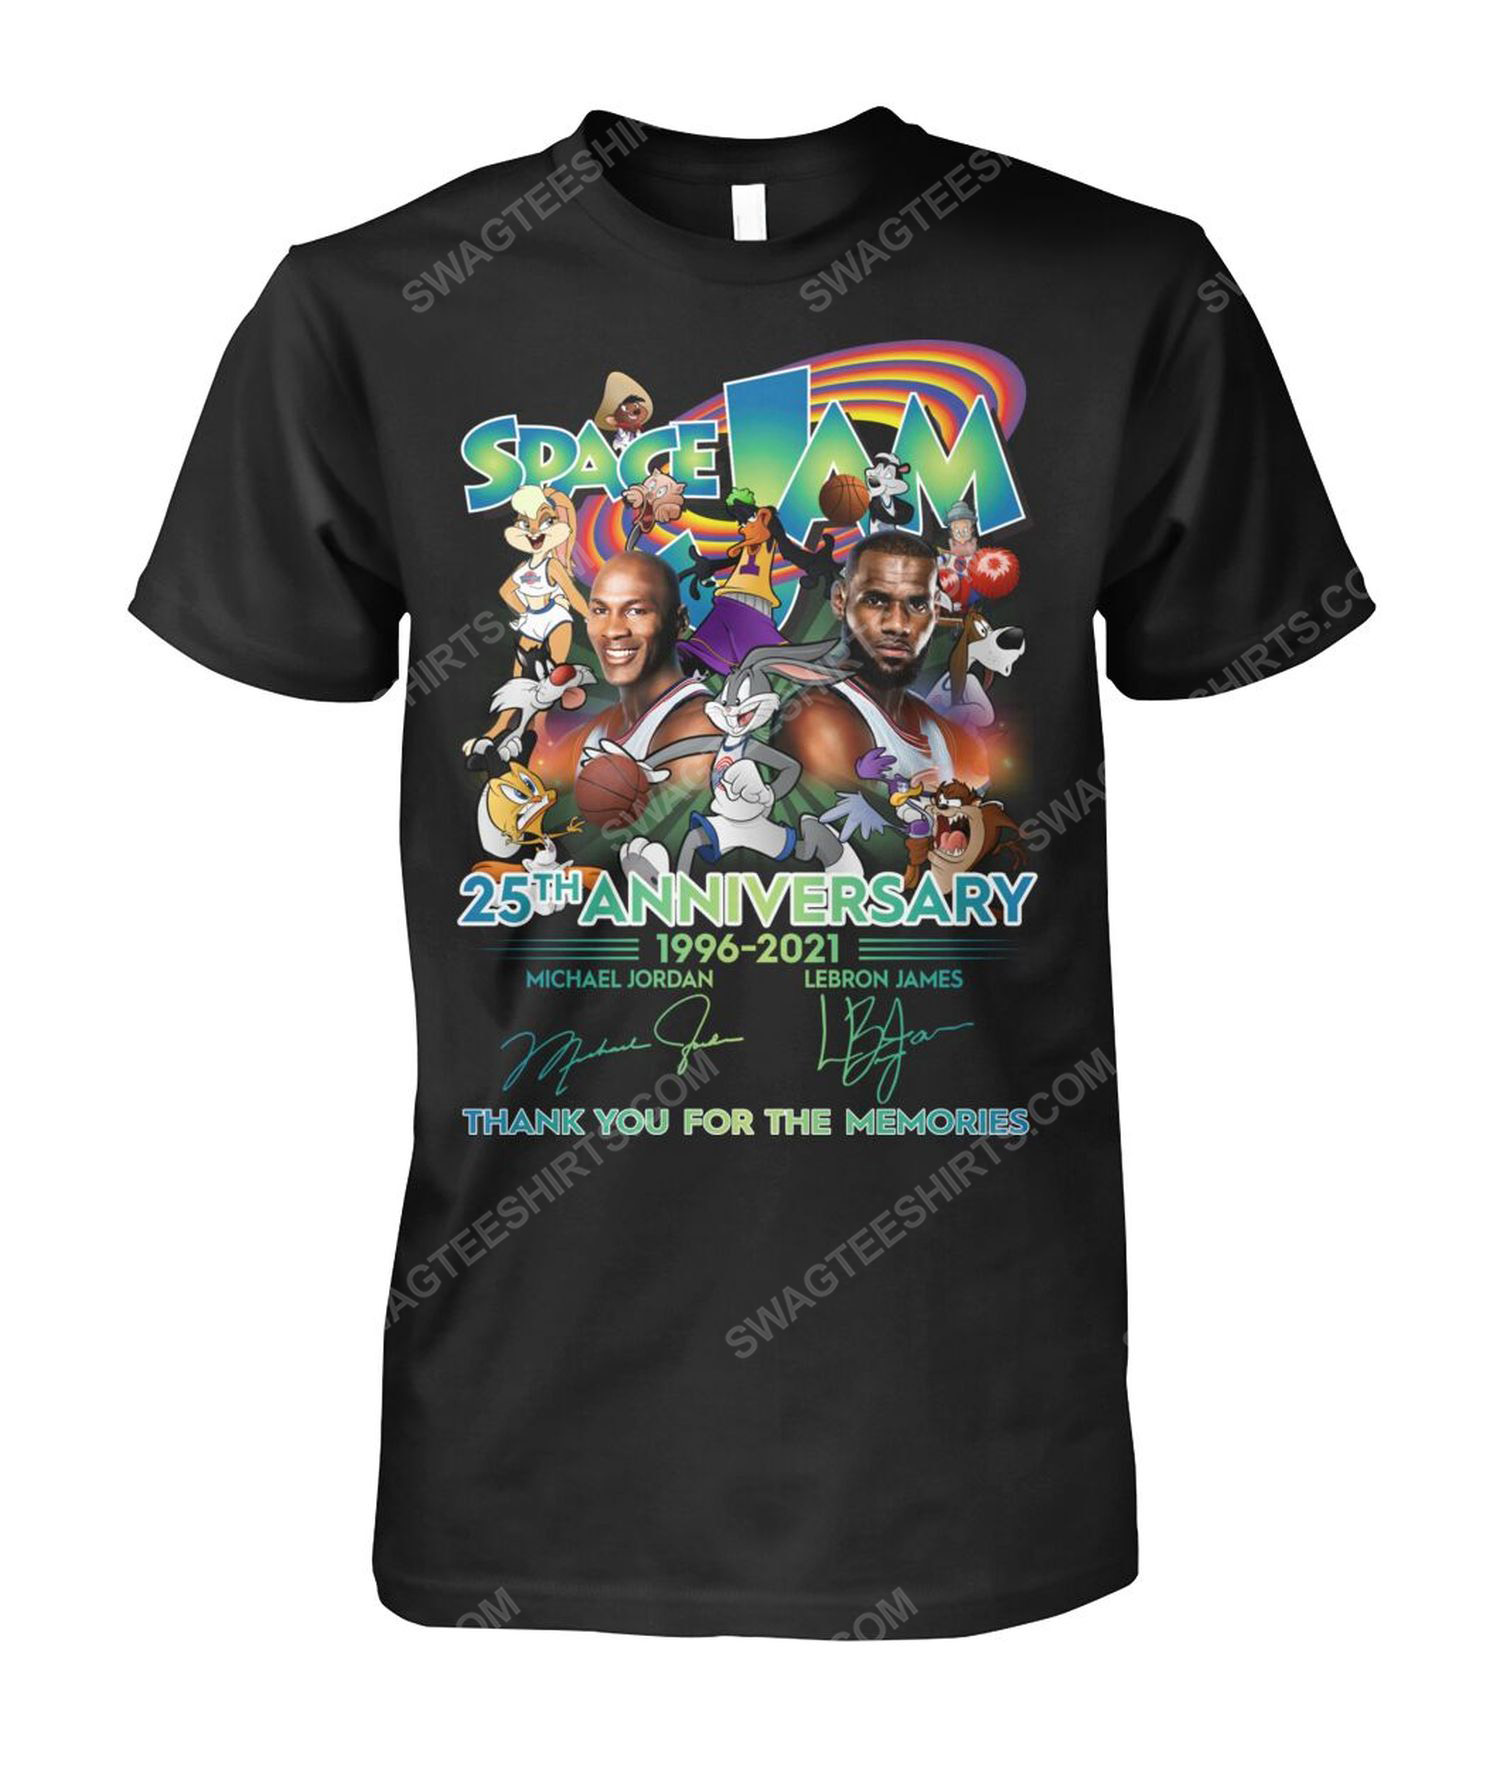 Space jam thank you for the memories tshirt